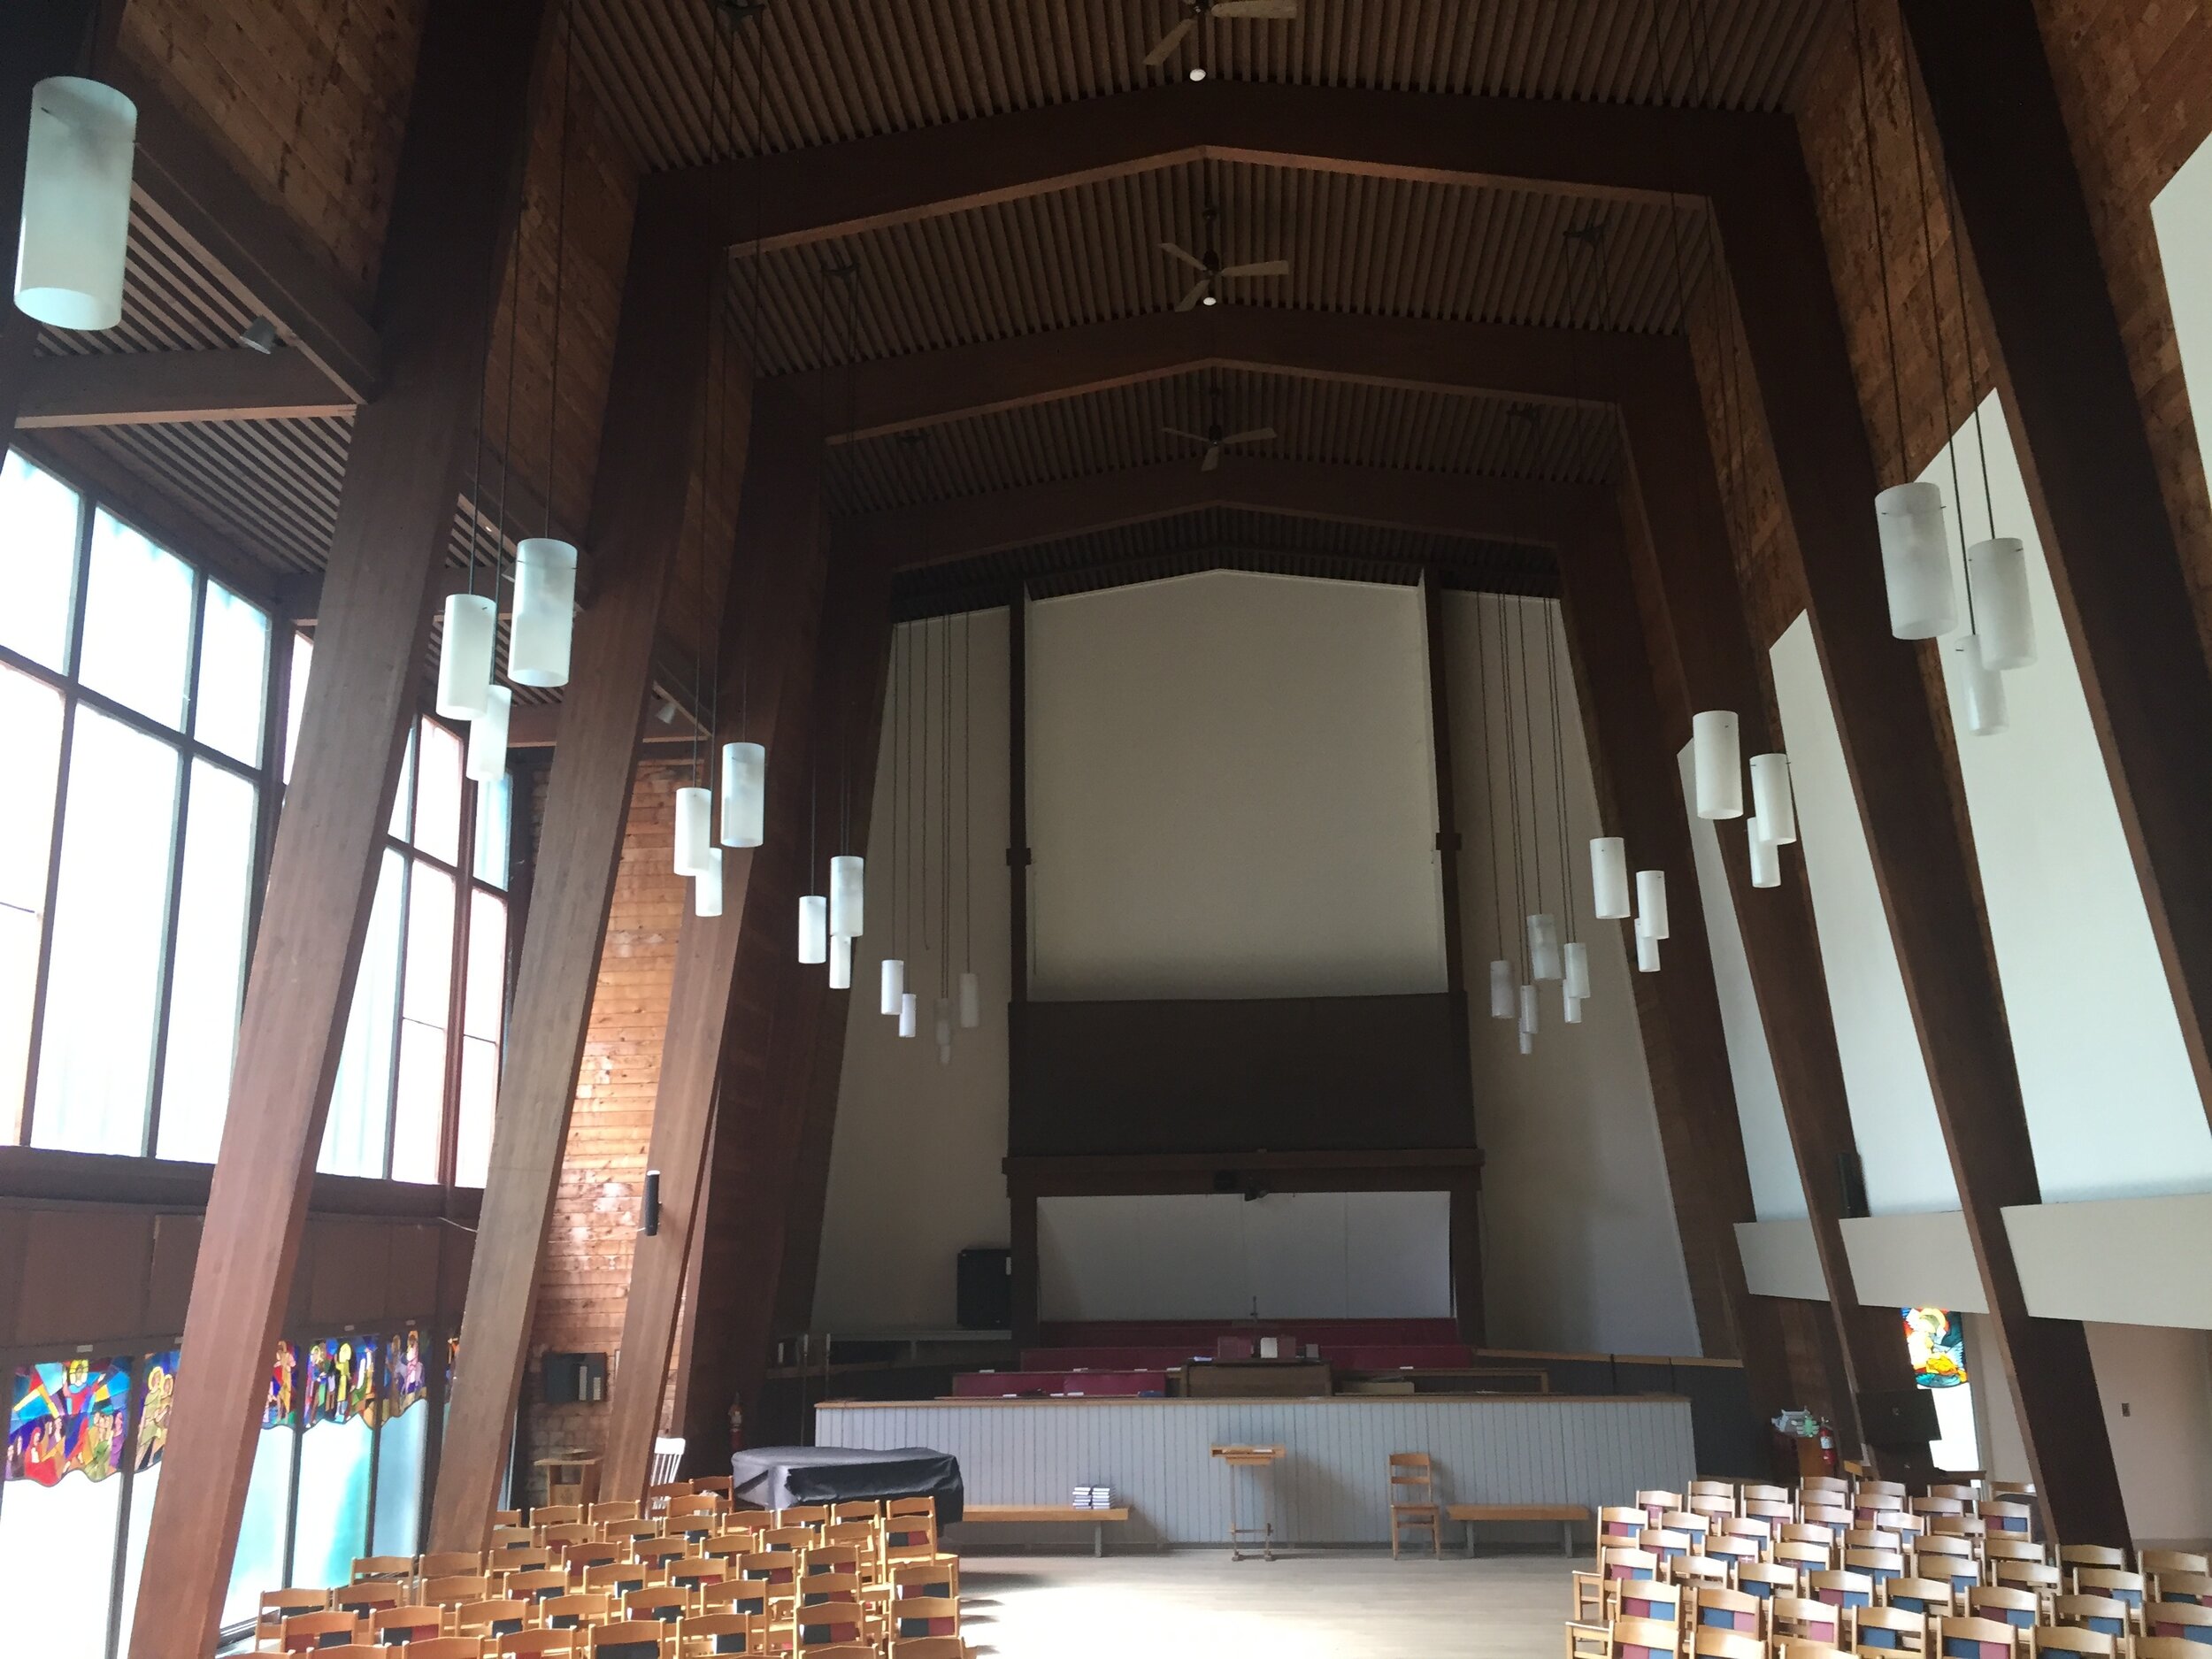 Looking back to the choir loft from the altar